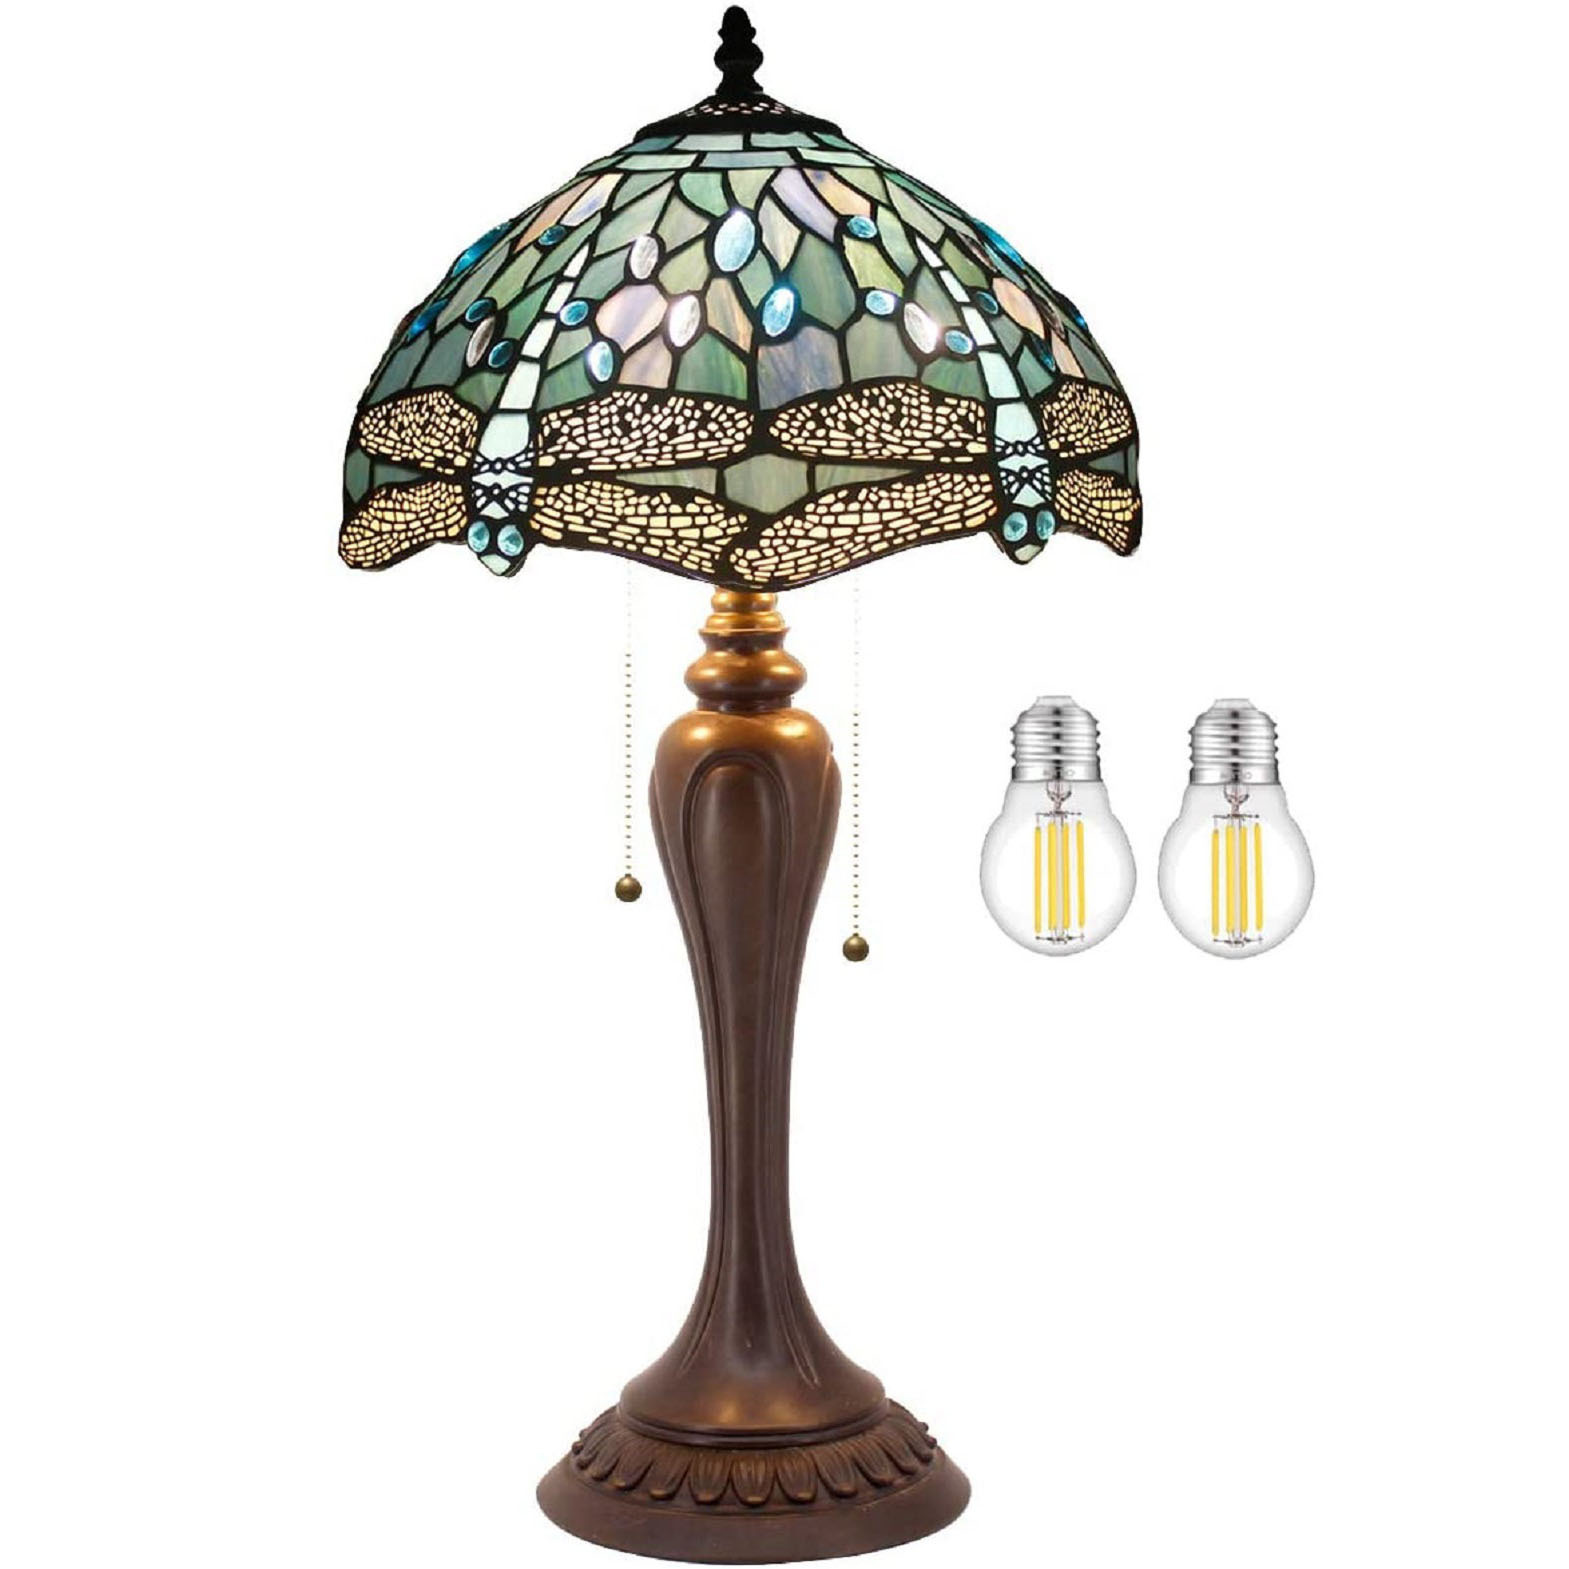 Brunswick Tiffany Table Lamp Sea Blue Stained Glass Dragonfly Style Teal Shade Resin Base 22